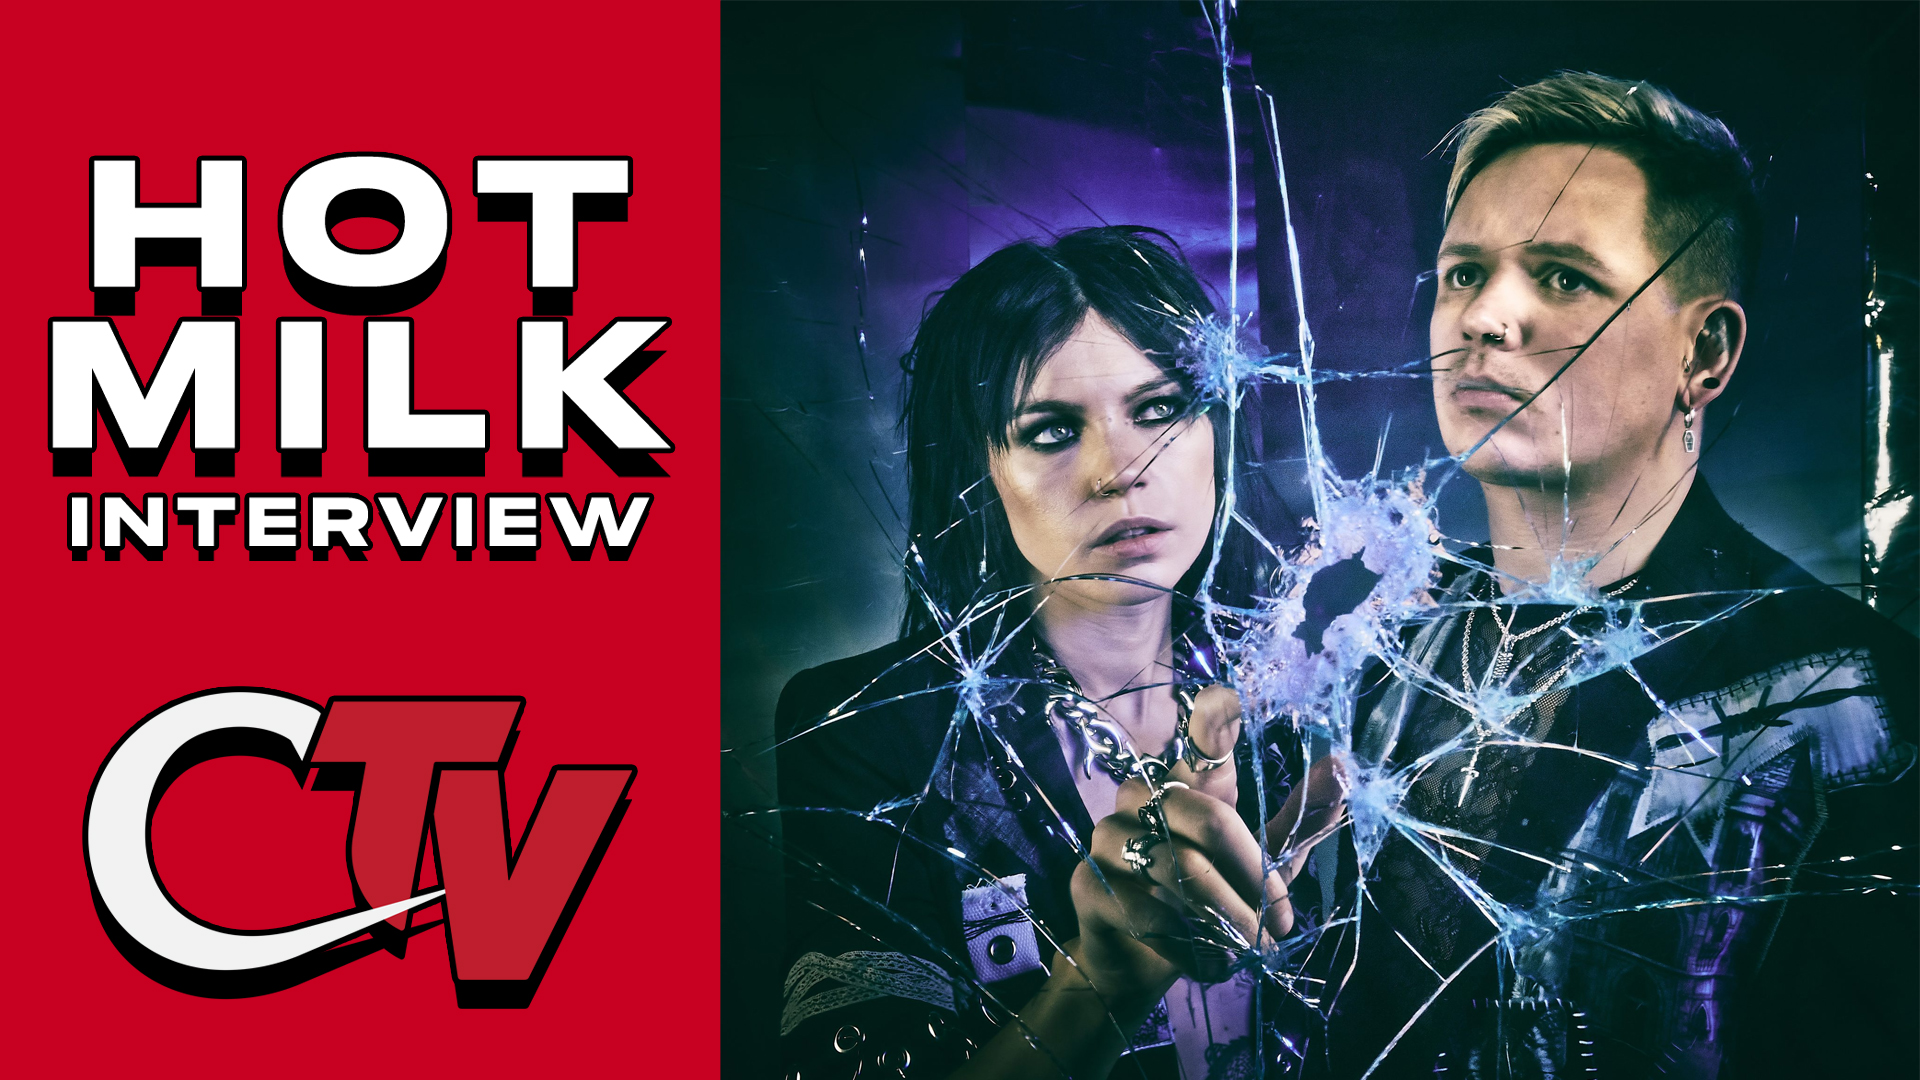 INTERVIEW: Hot Milk Discusses New Album ‘A CALL TO THE VOID’